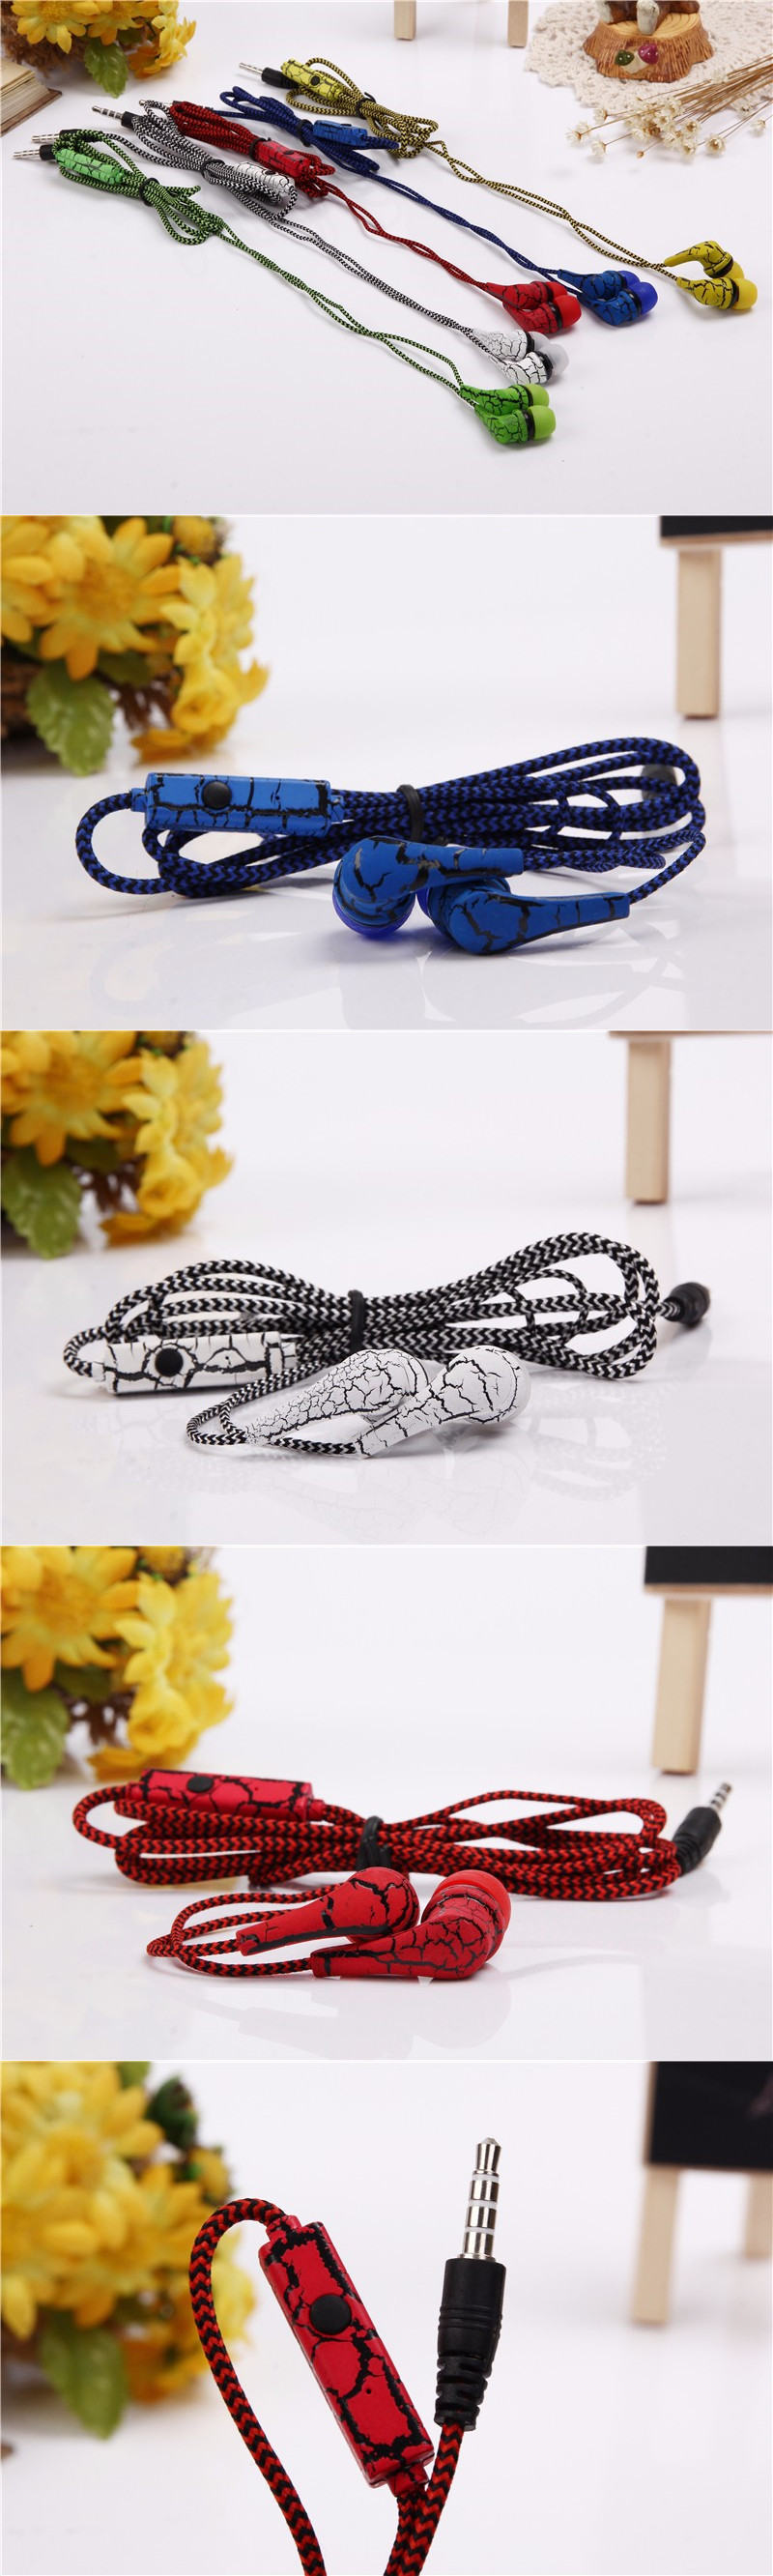 Portable-35mm-Wired-Music-Headset-Super-Bass-Crack-In-ear-Earphone-Headphone-With-Mic-for-IPhone-Xia-1430491-5